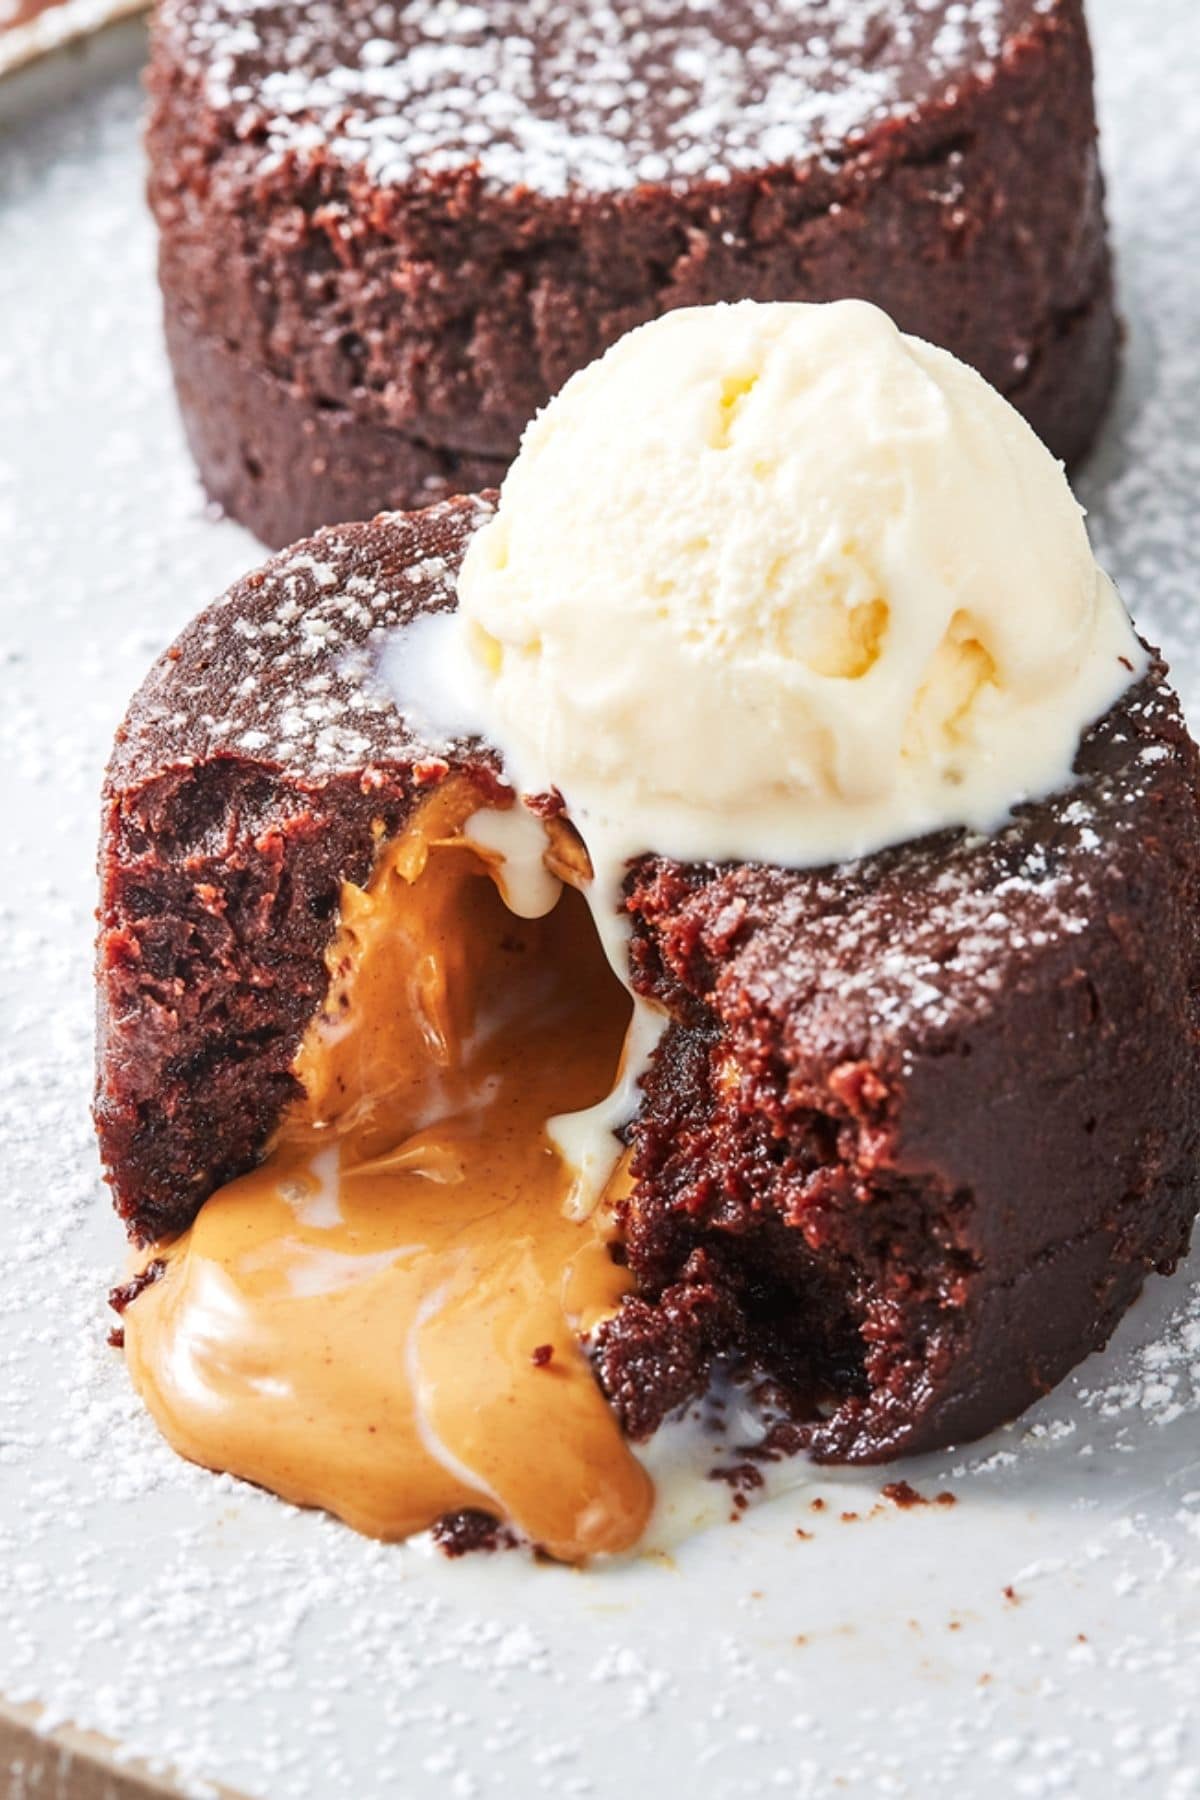 Peanut butter oozing out of chocolate lava cake